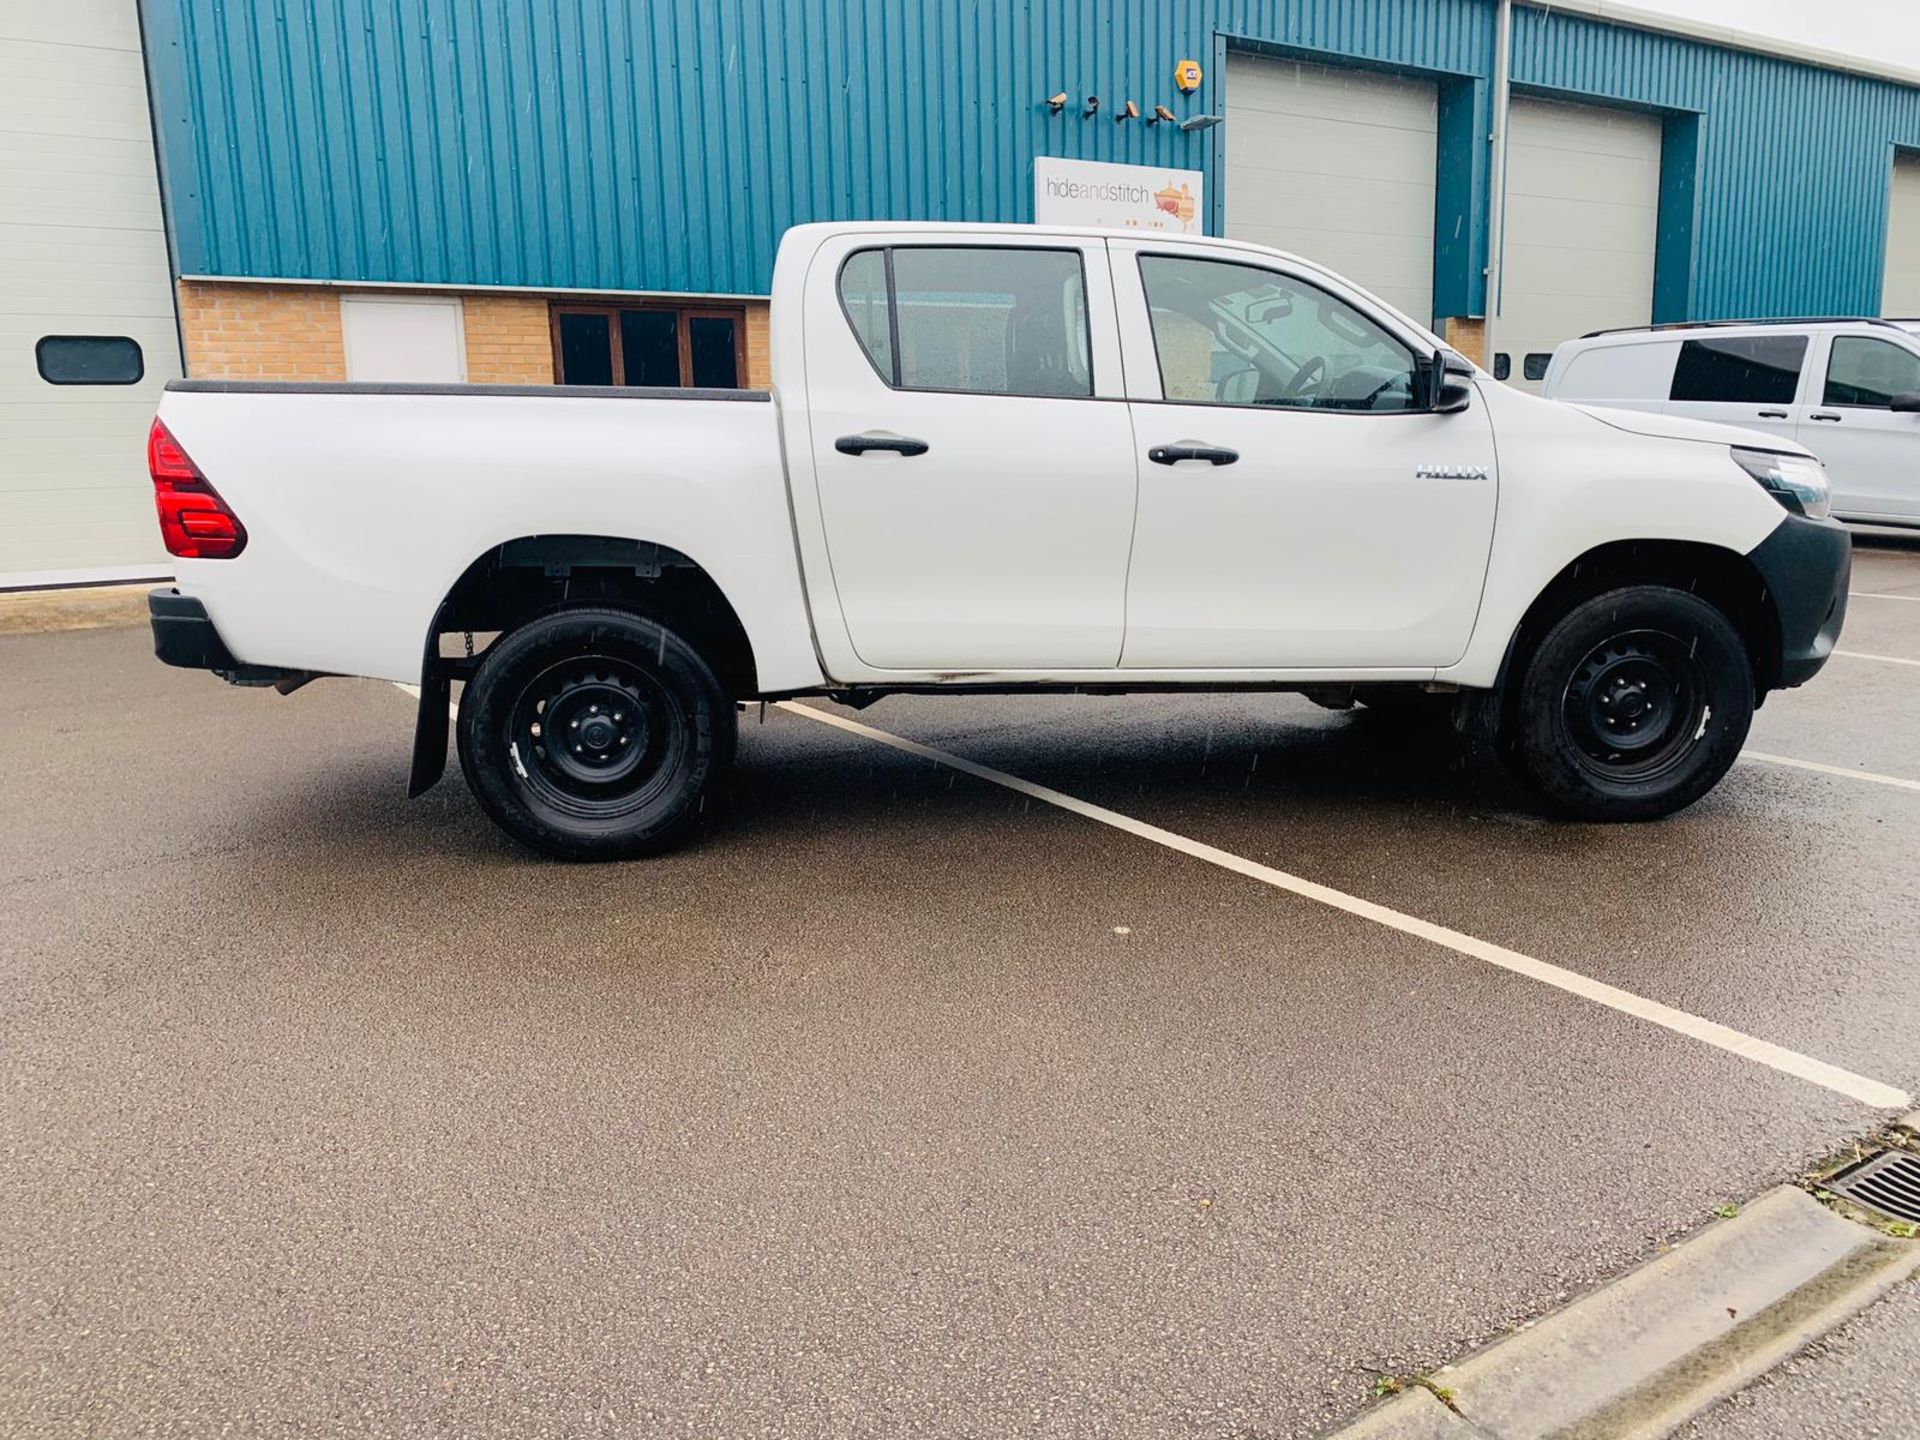 Toyota Hilux 2.4 D-4D Active 4WD Double Cab Pick Up - 2017 17 Reg - Air Con - Euro 6b - Tow Pack - Image 9 of 31